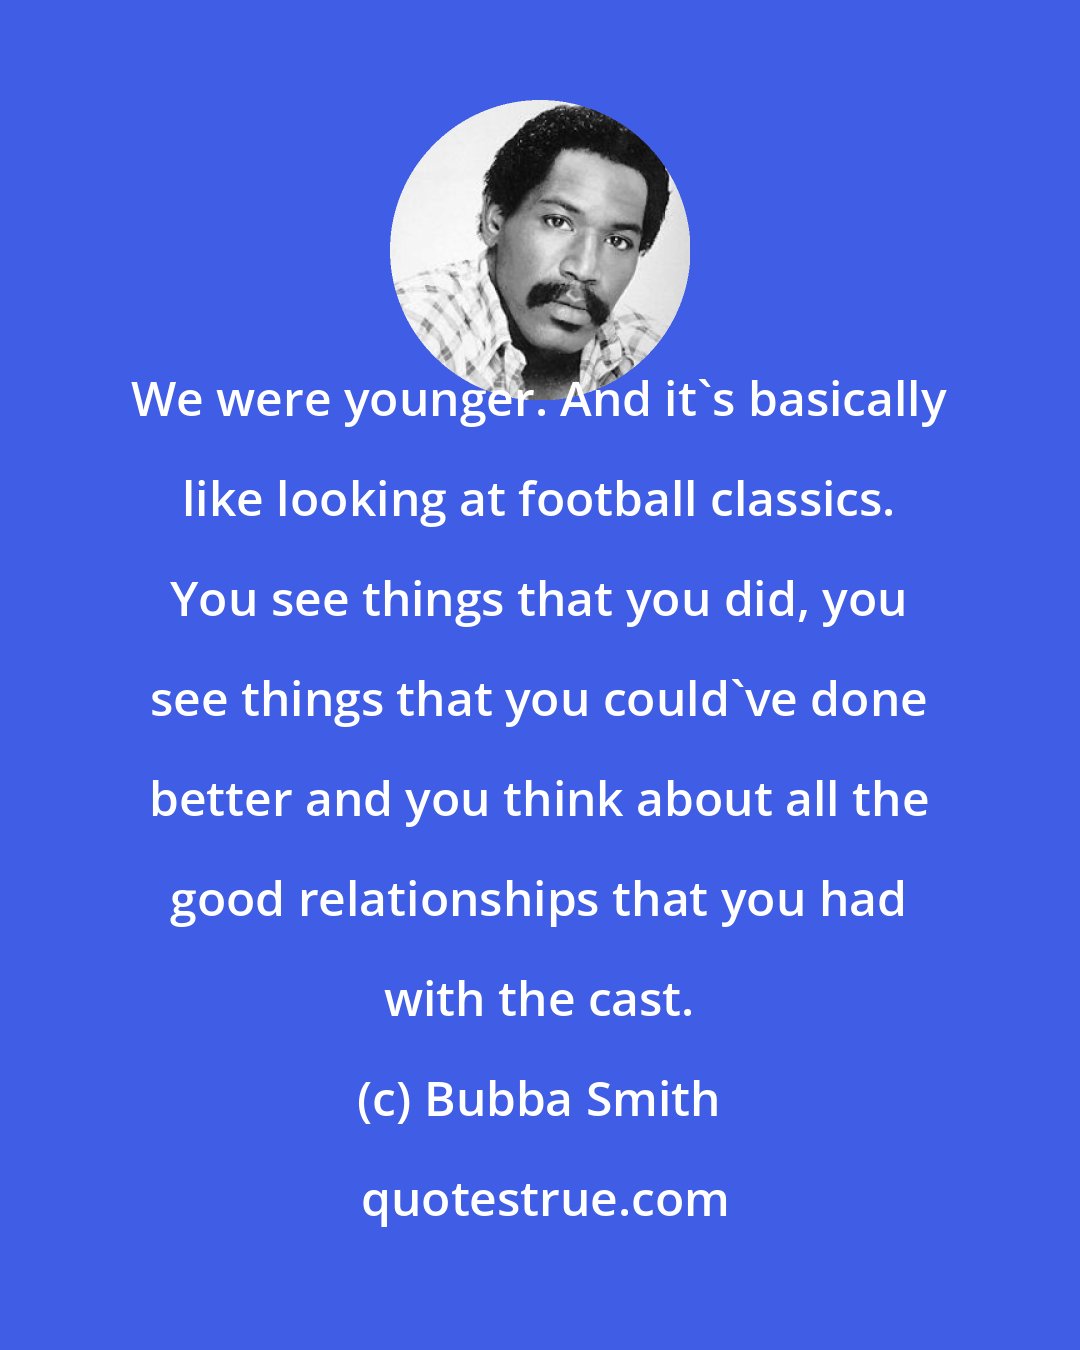 Bubba Smith: We were younger. And it's basically like looking at football classics. You see things that you did, you see things that you could've done better and you think about all the good relationships that you had with the cast.